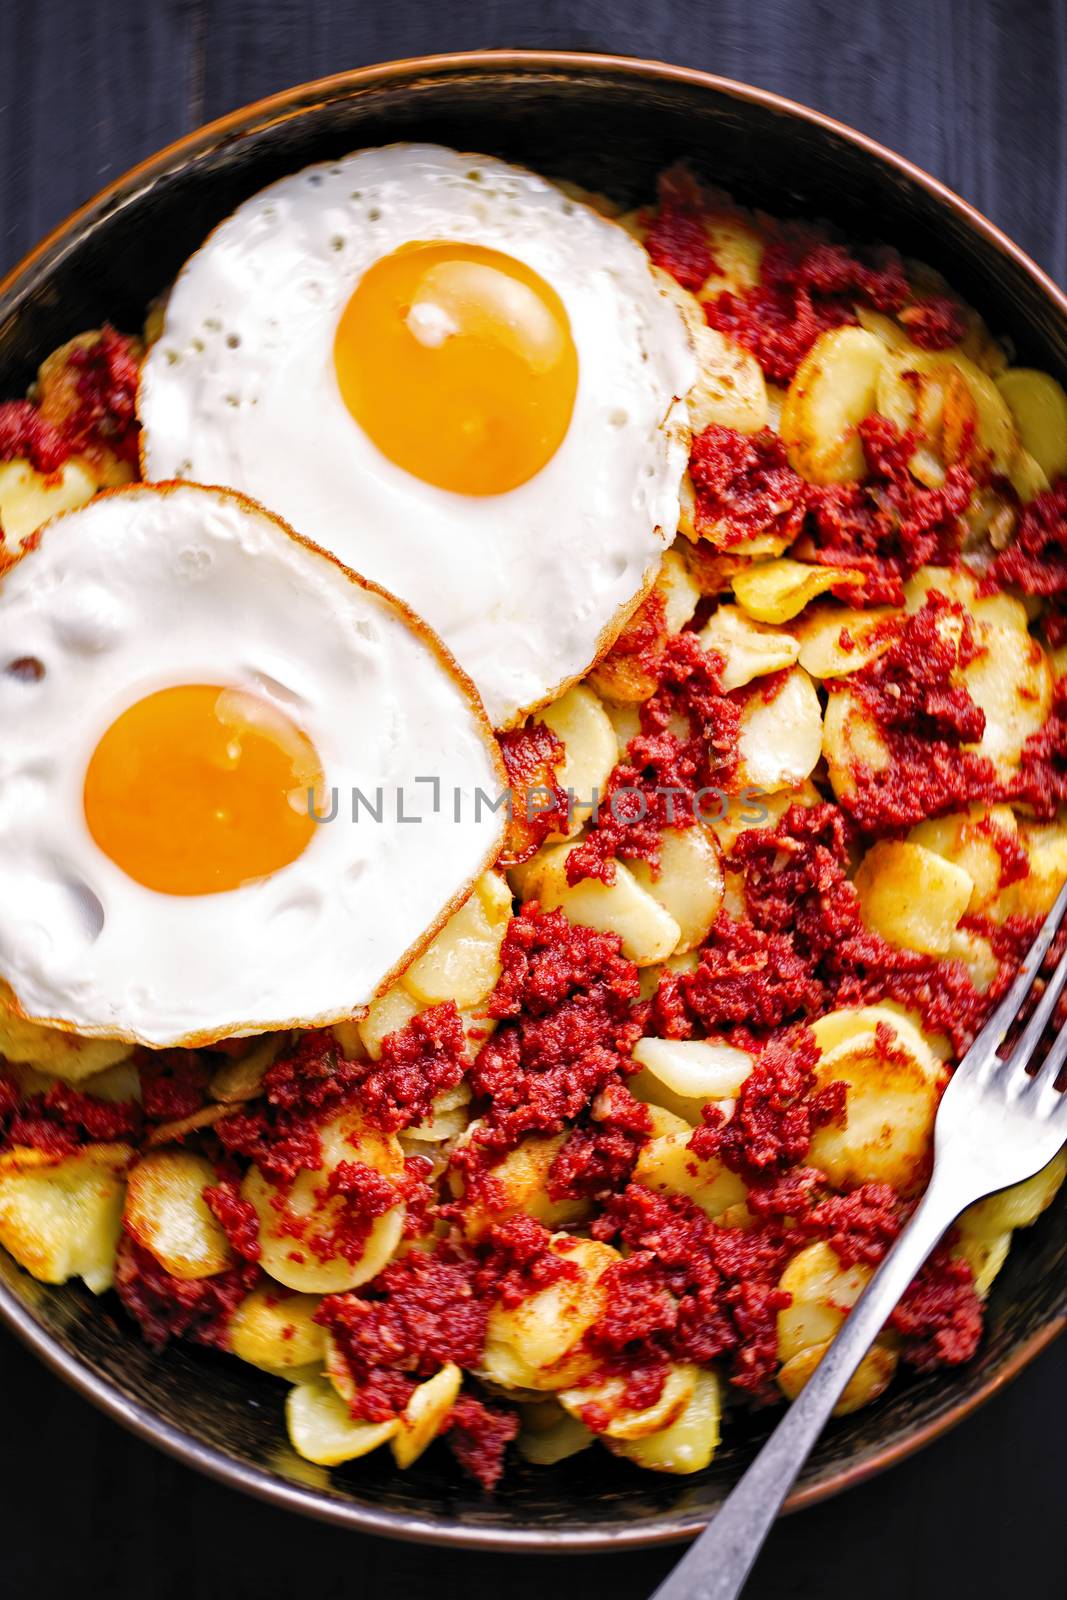 rustic corned beef hash by zkruger